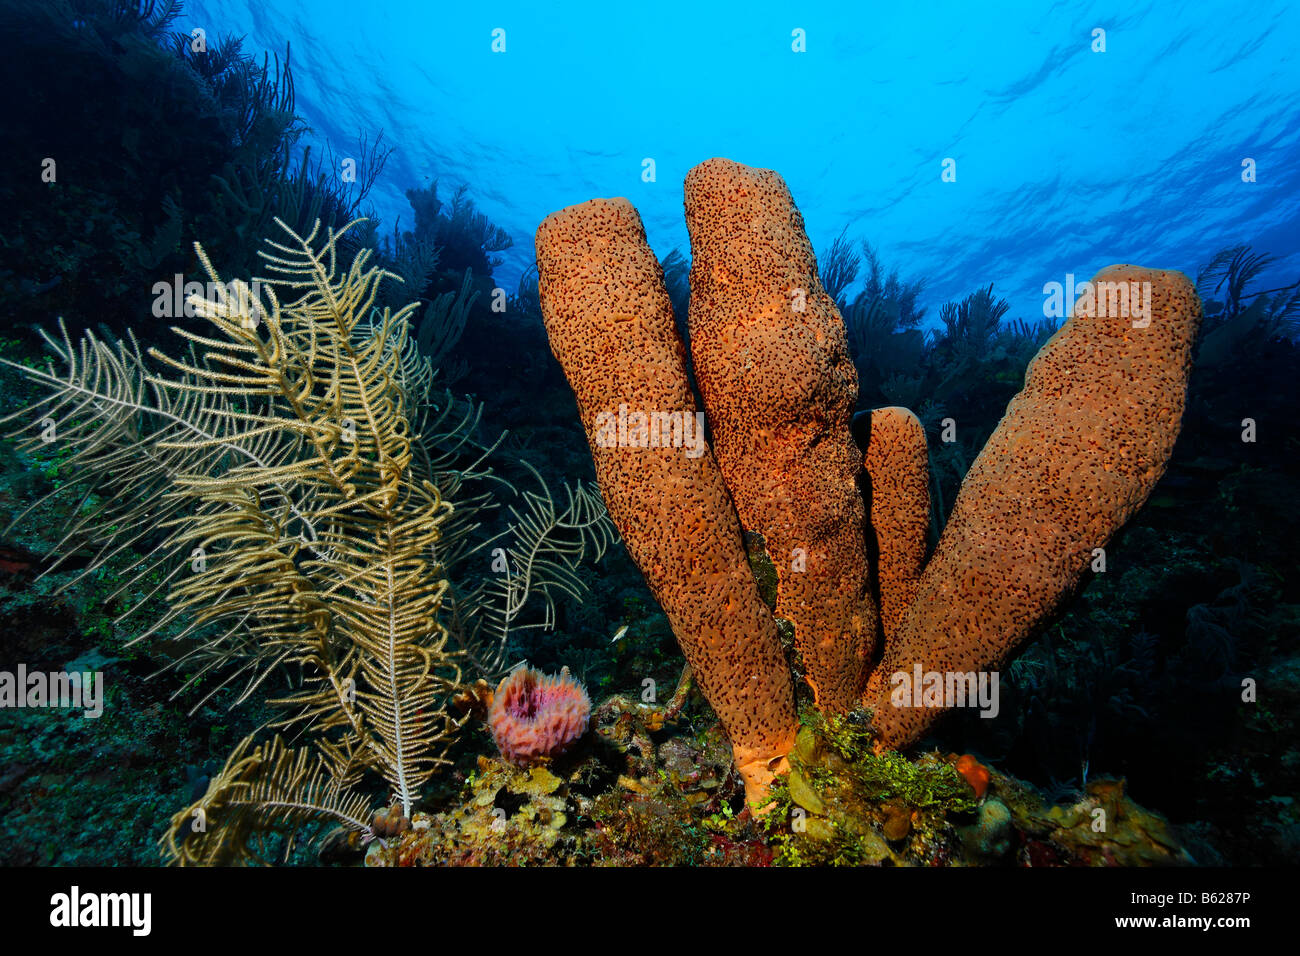 Brown tube sponge (Agelas conifera) on a cliff face in a coral reef with a  Sea Plume (Pseudopterogorgia sp.), Hopkins, Dangria Stock Photo - Alamy